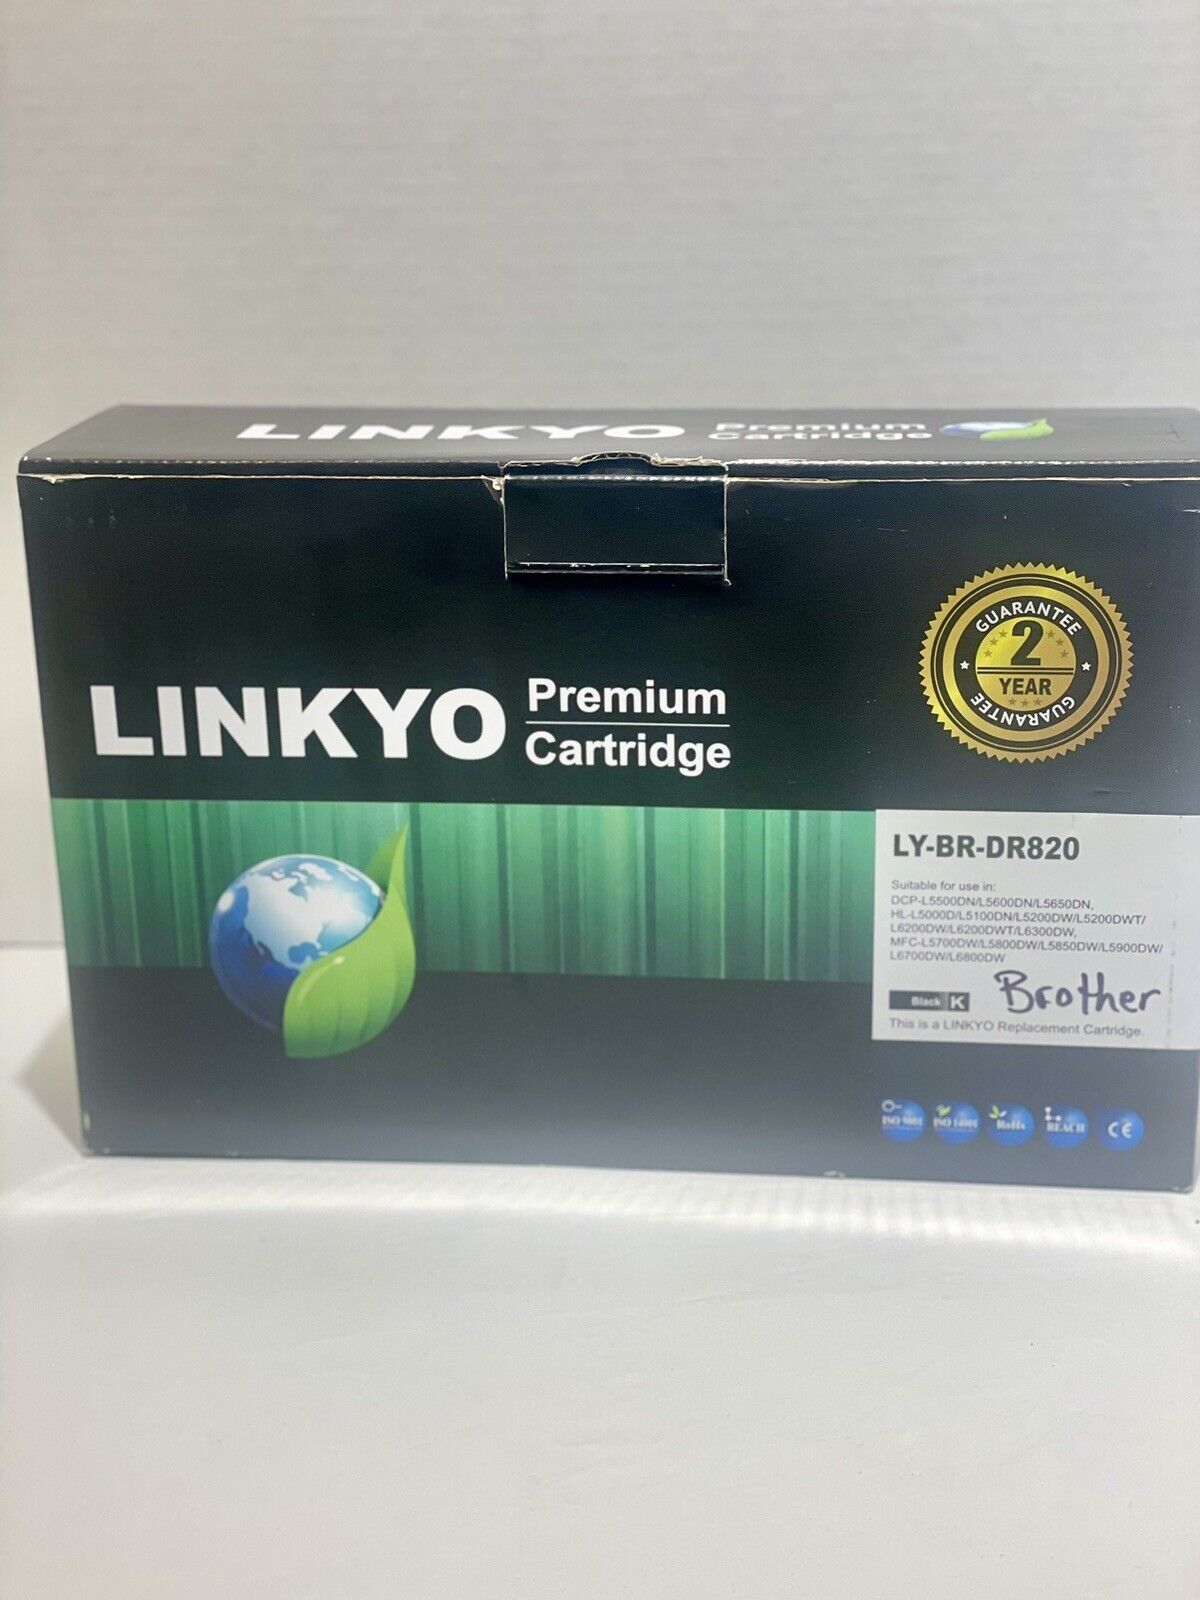 Toner Cartridge Black  Replacement  LY-BR-DR820 Sealed Linkyo Premium New In Box